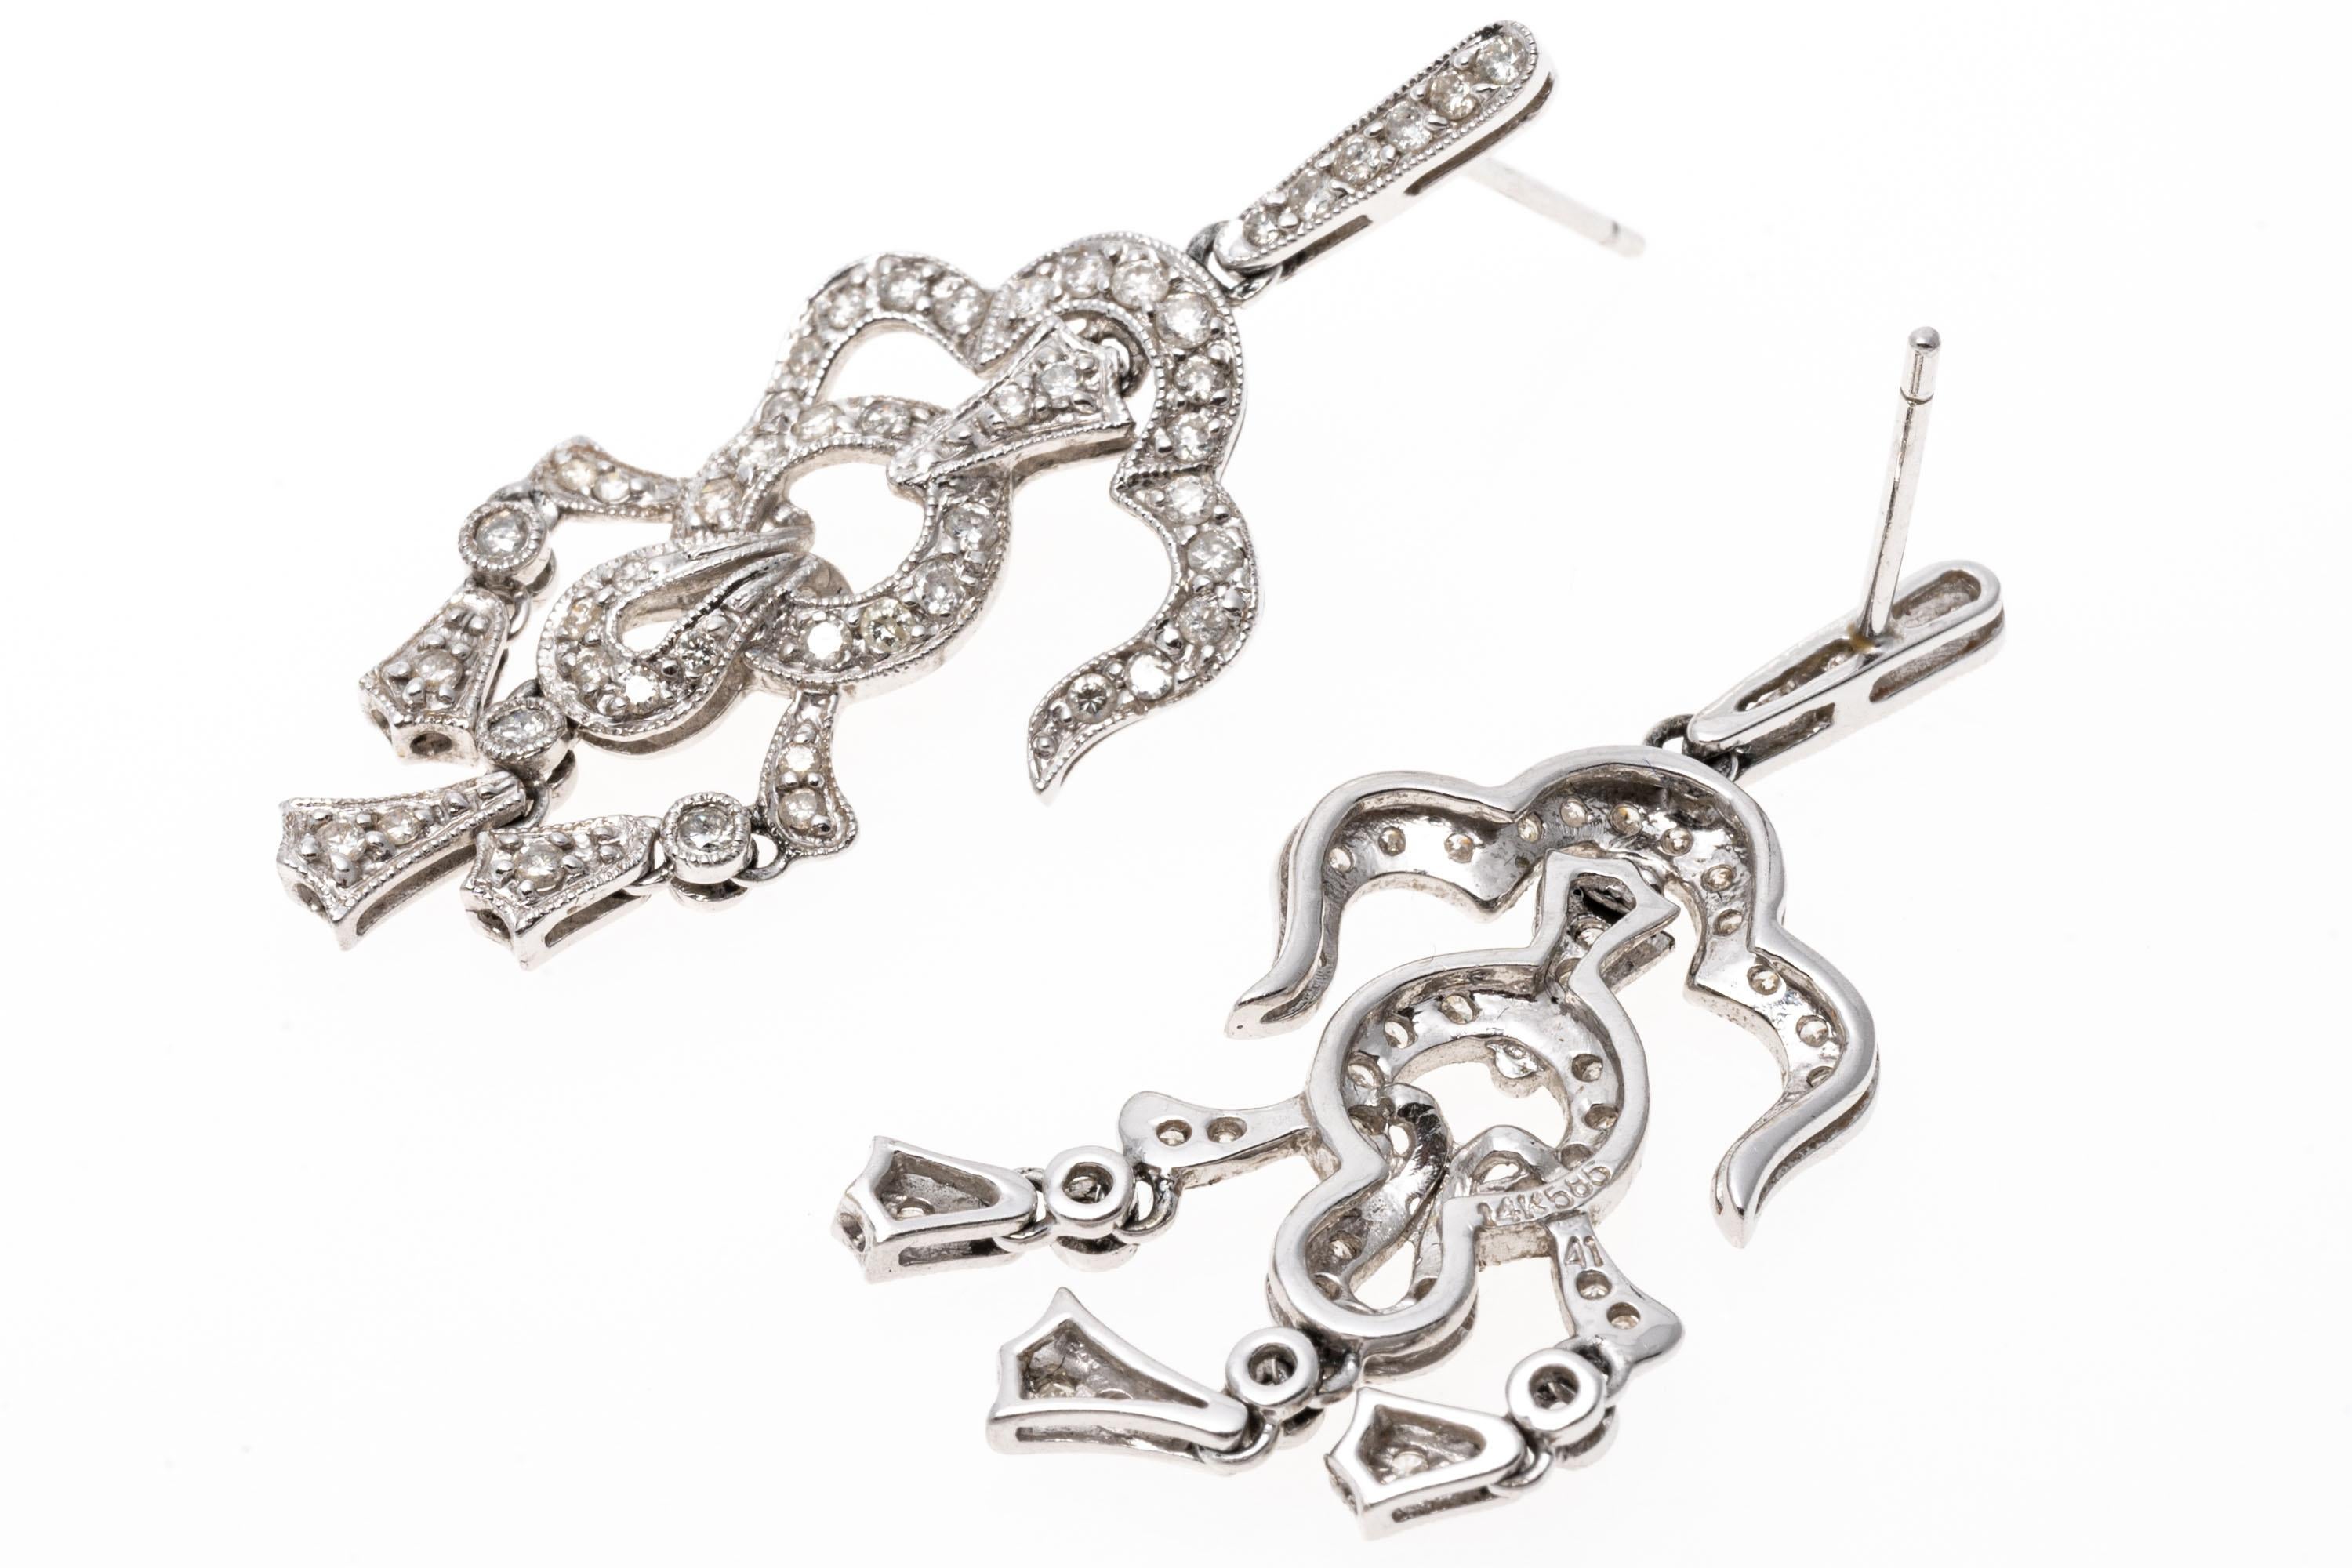 14K White Gold And Diamond Ornate Chandelier Earrings In Good Condition For Sale In Southport, CT